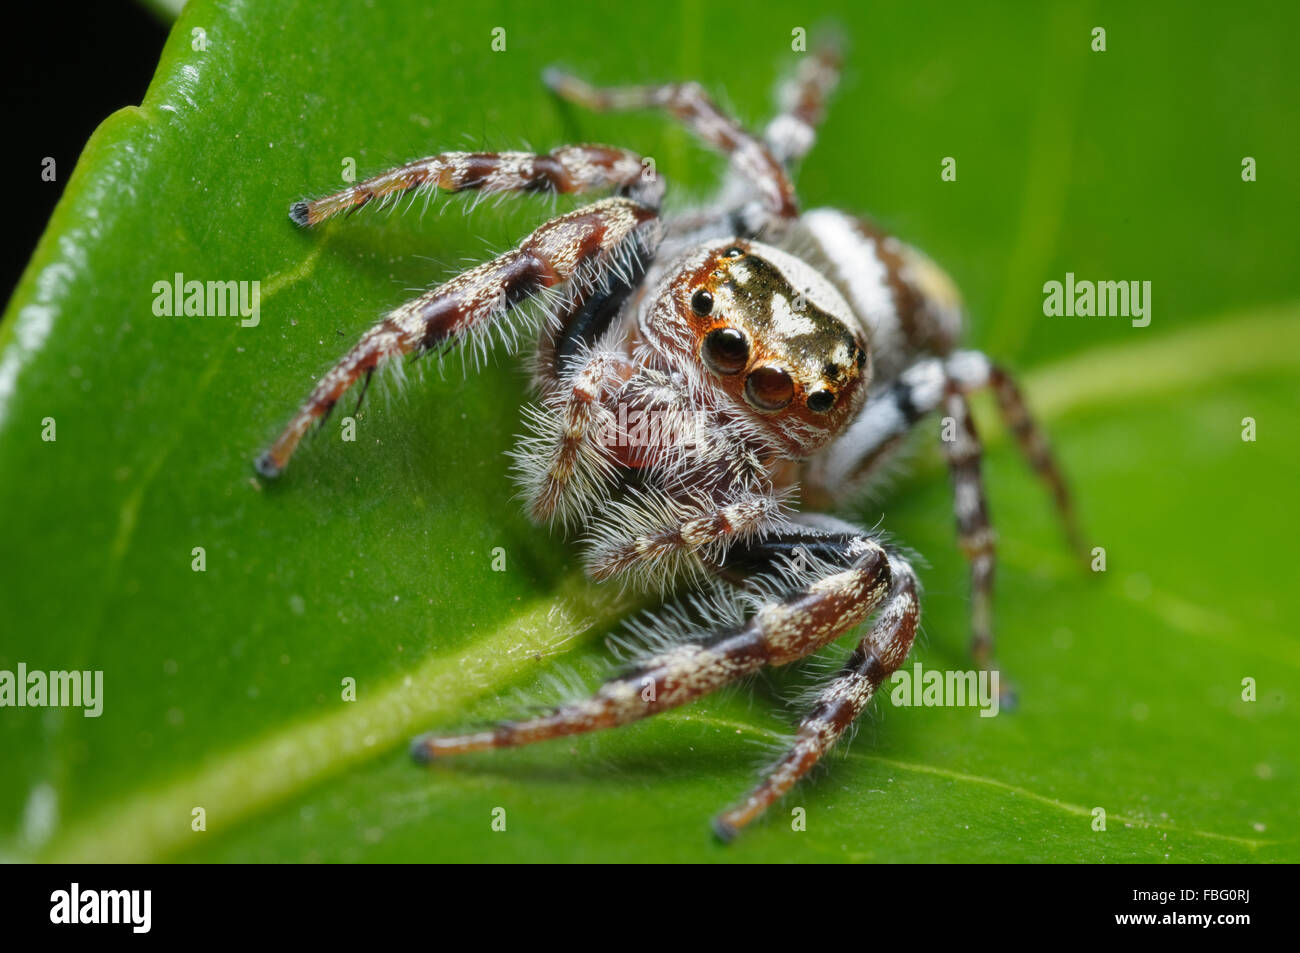 Garden jumping spider, Opisthoncus sp., at Glenbrook, New South Wales, Australia. Stock Photo